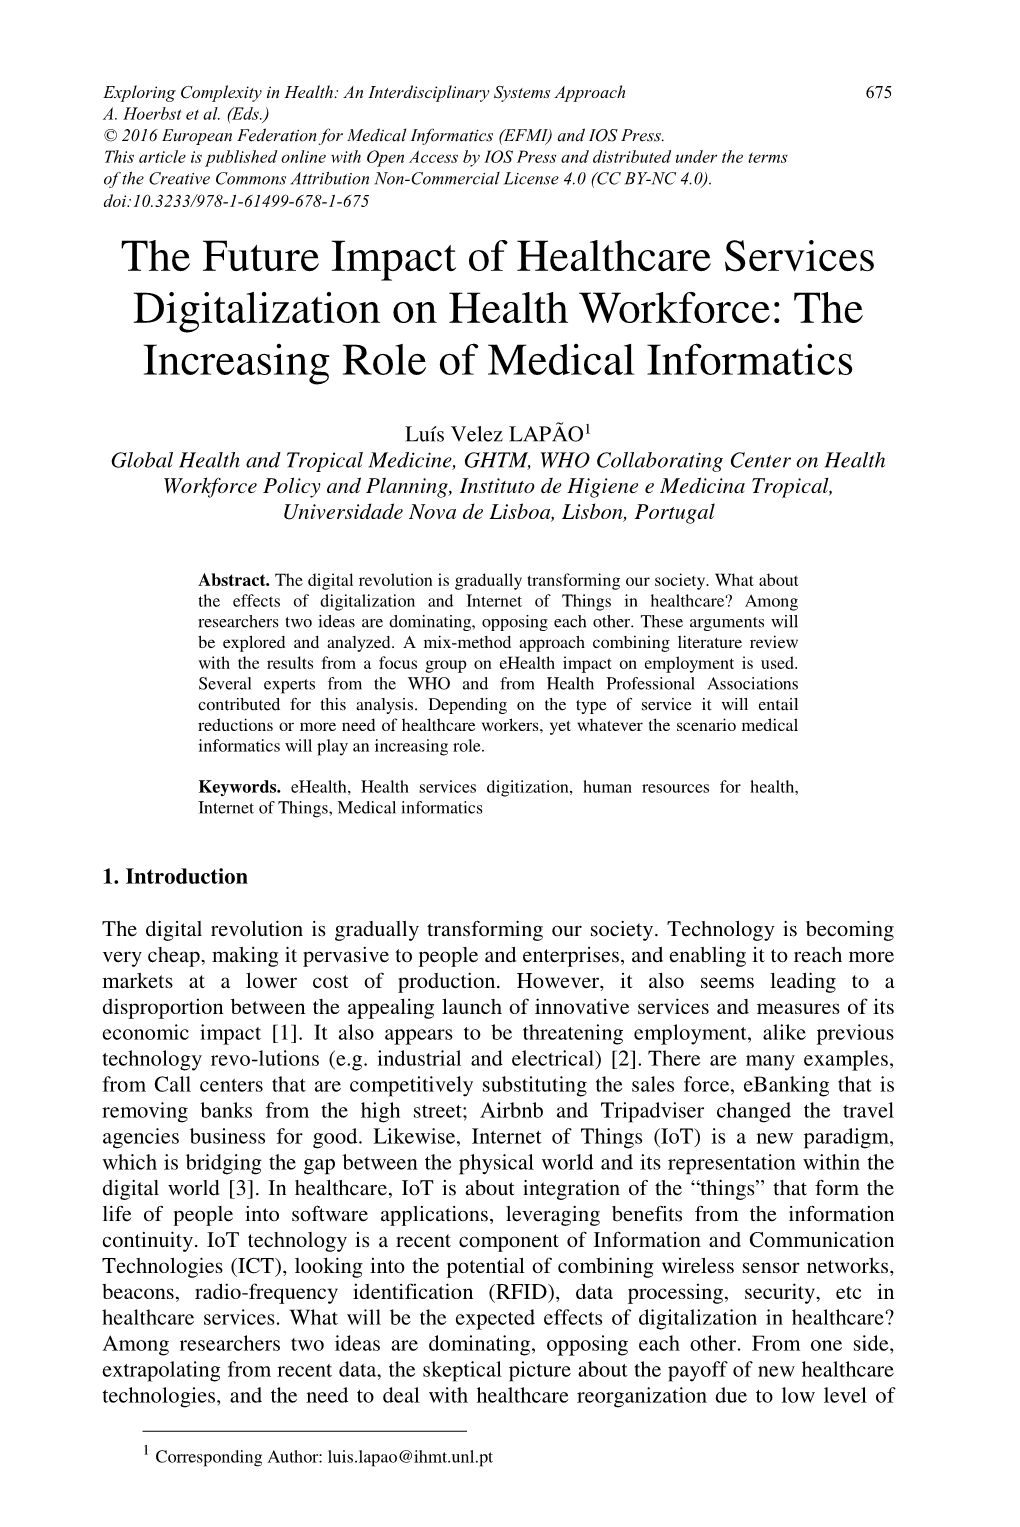 The Future Impact of Healthcare Services Digitalization on Health Workforce: the Increasing Role of Medical Informatics